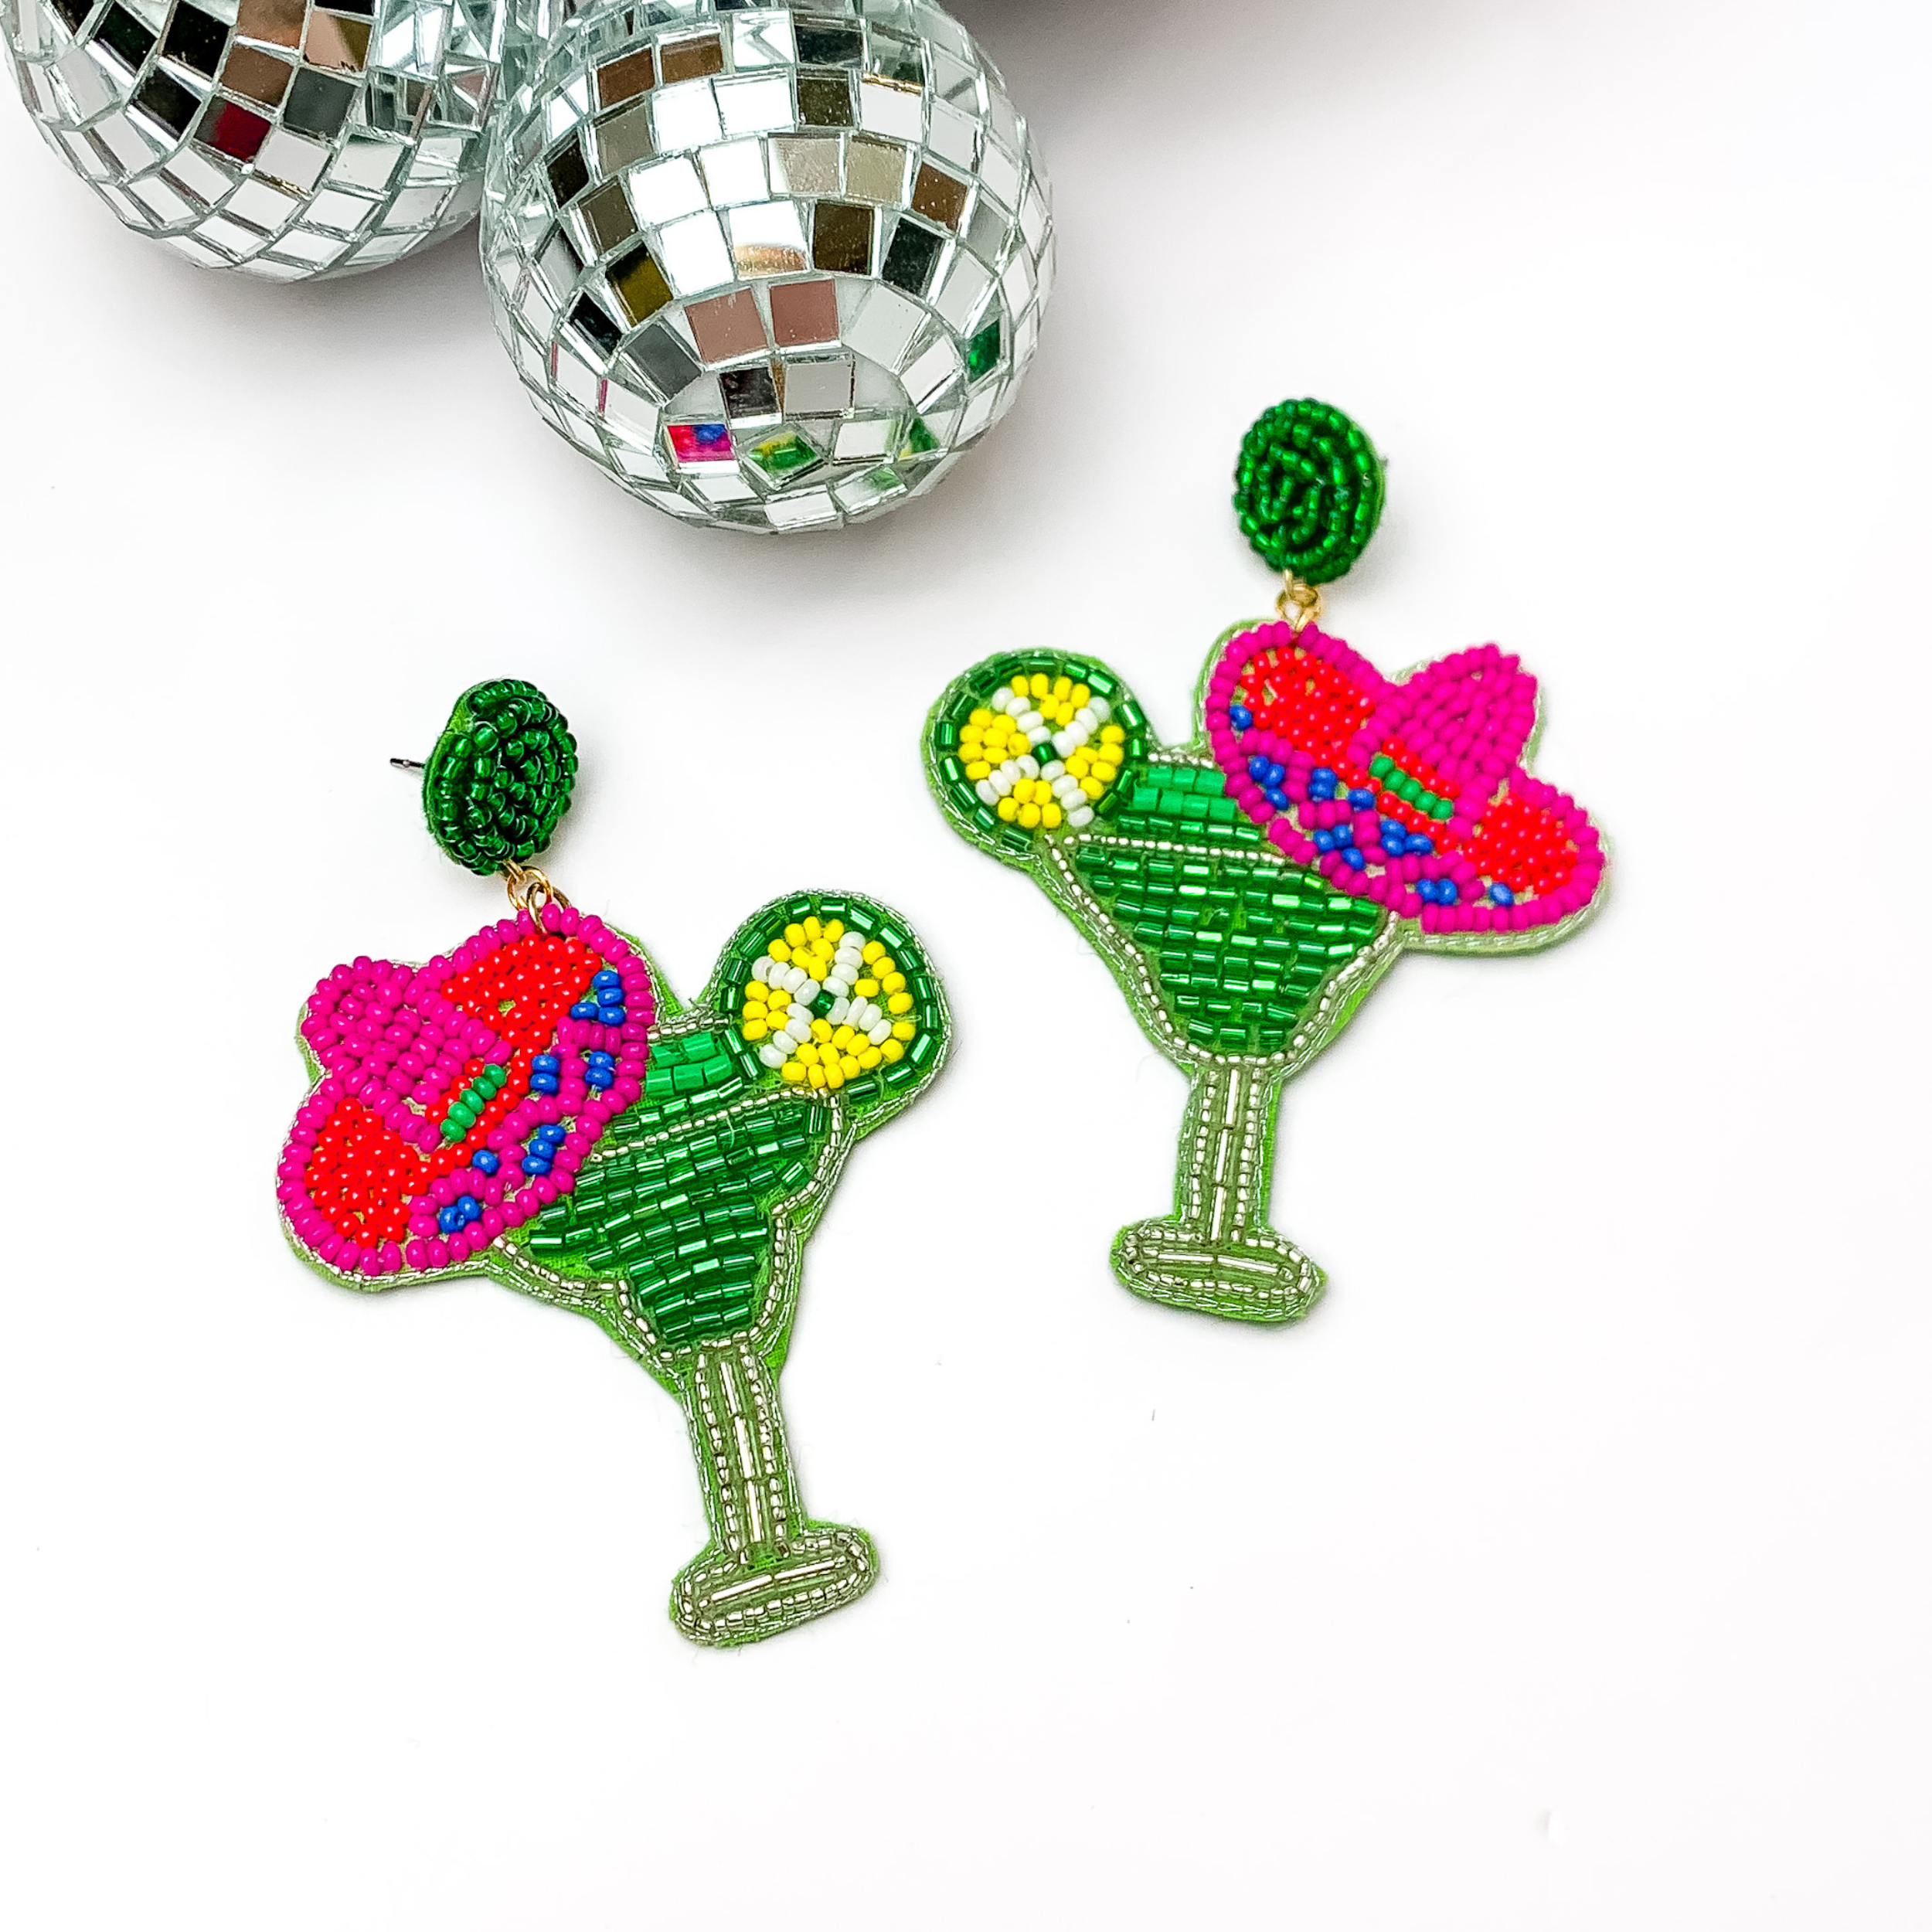 Margarita sombrero seed beaded drop earrings in green. The sombrero has orange, dark blue, and pink sequins. Taken in a white background with disco balls in the left corner.